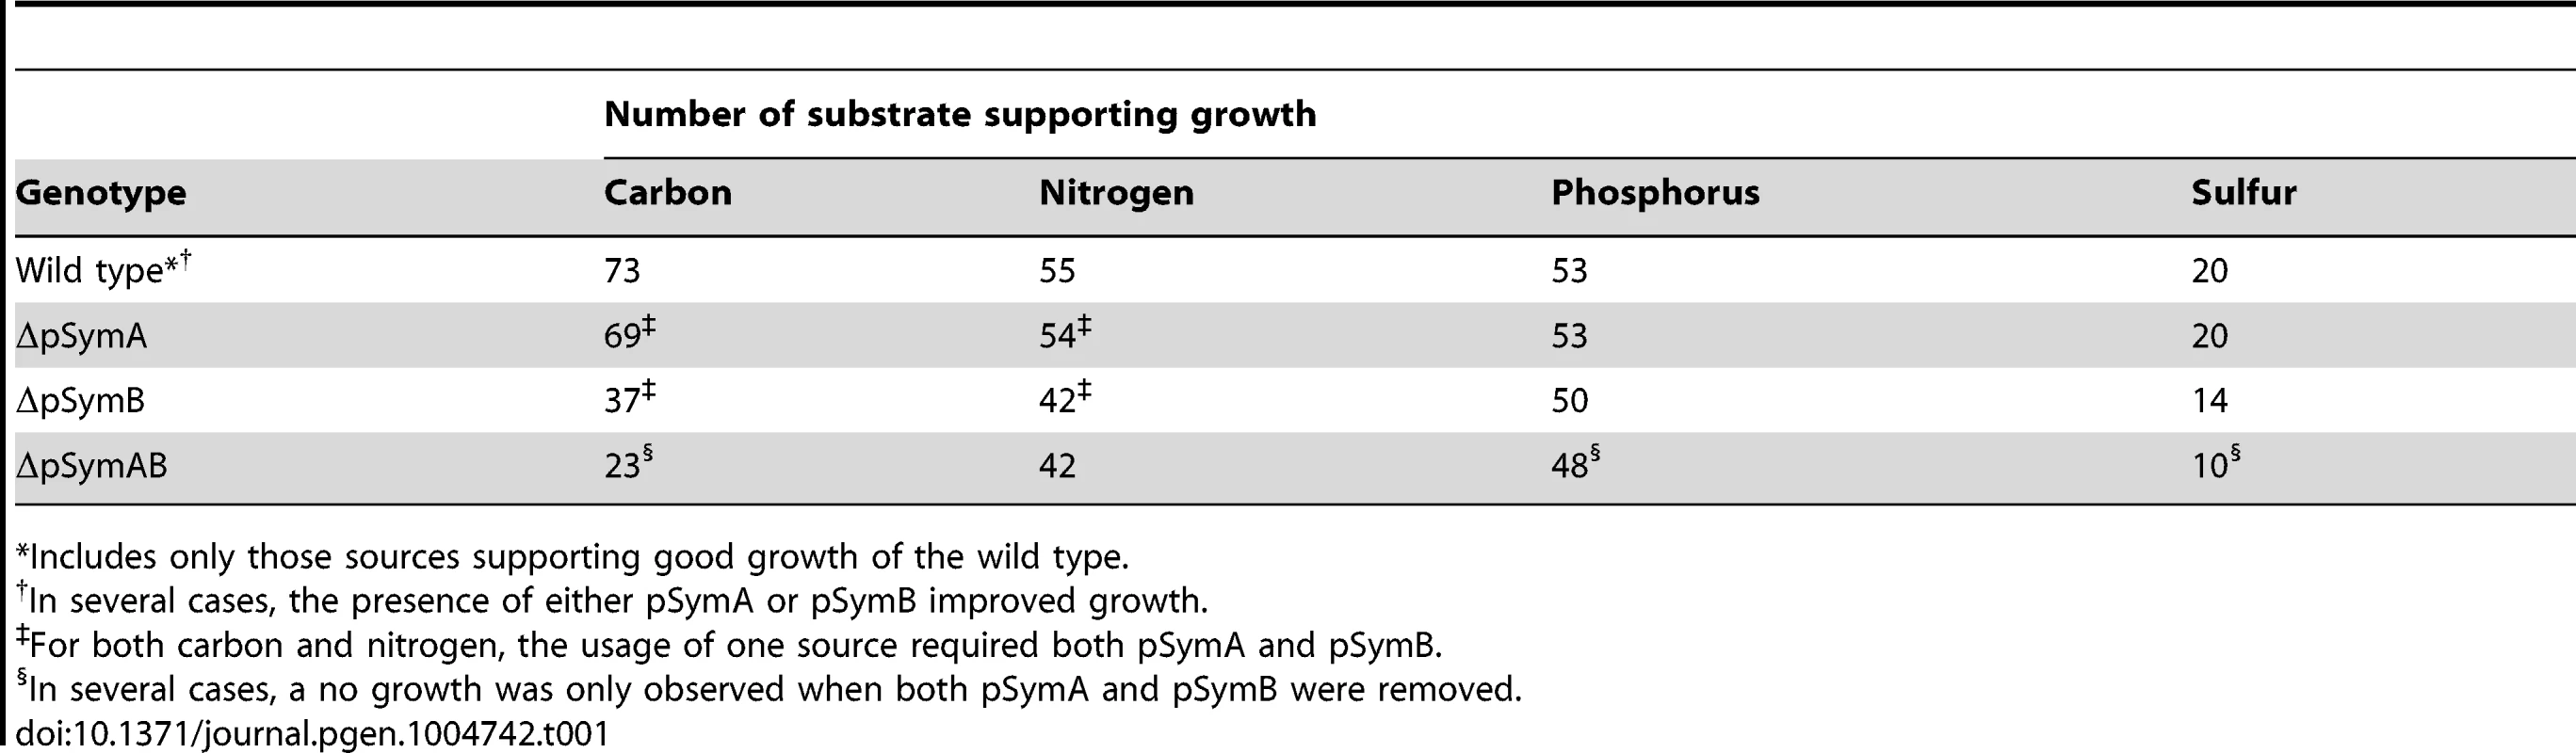 Nutrient sources supporting growth of <i>S. meliloti</i>.